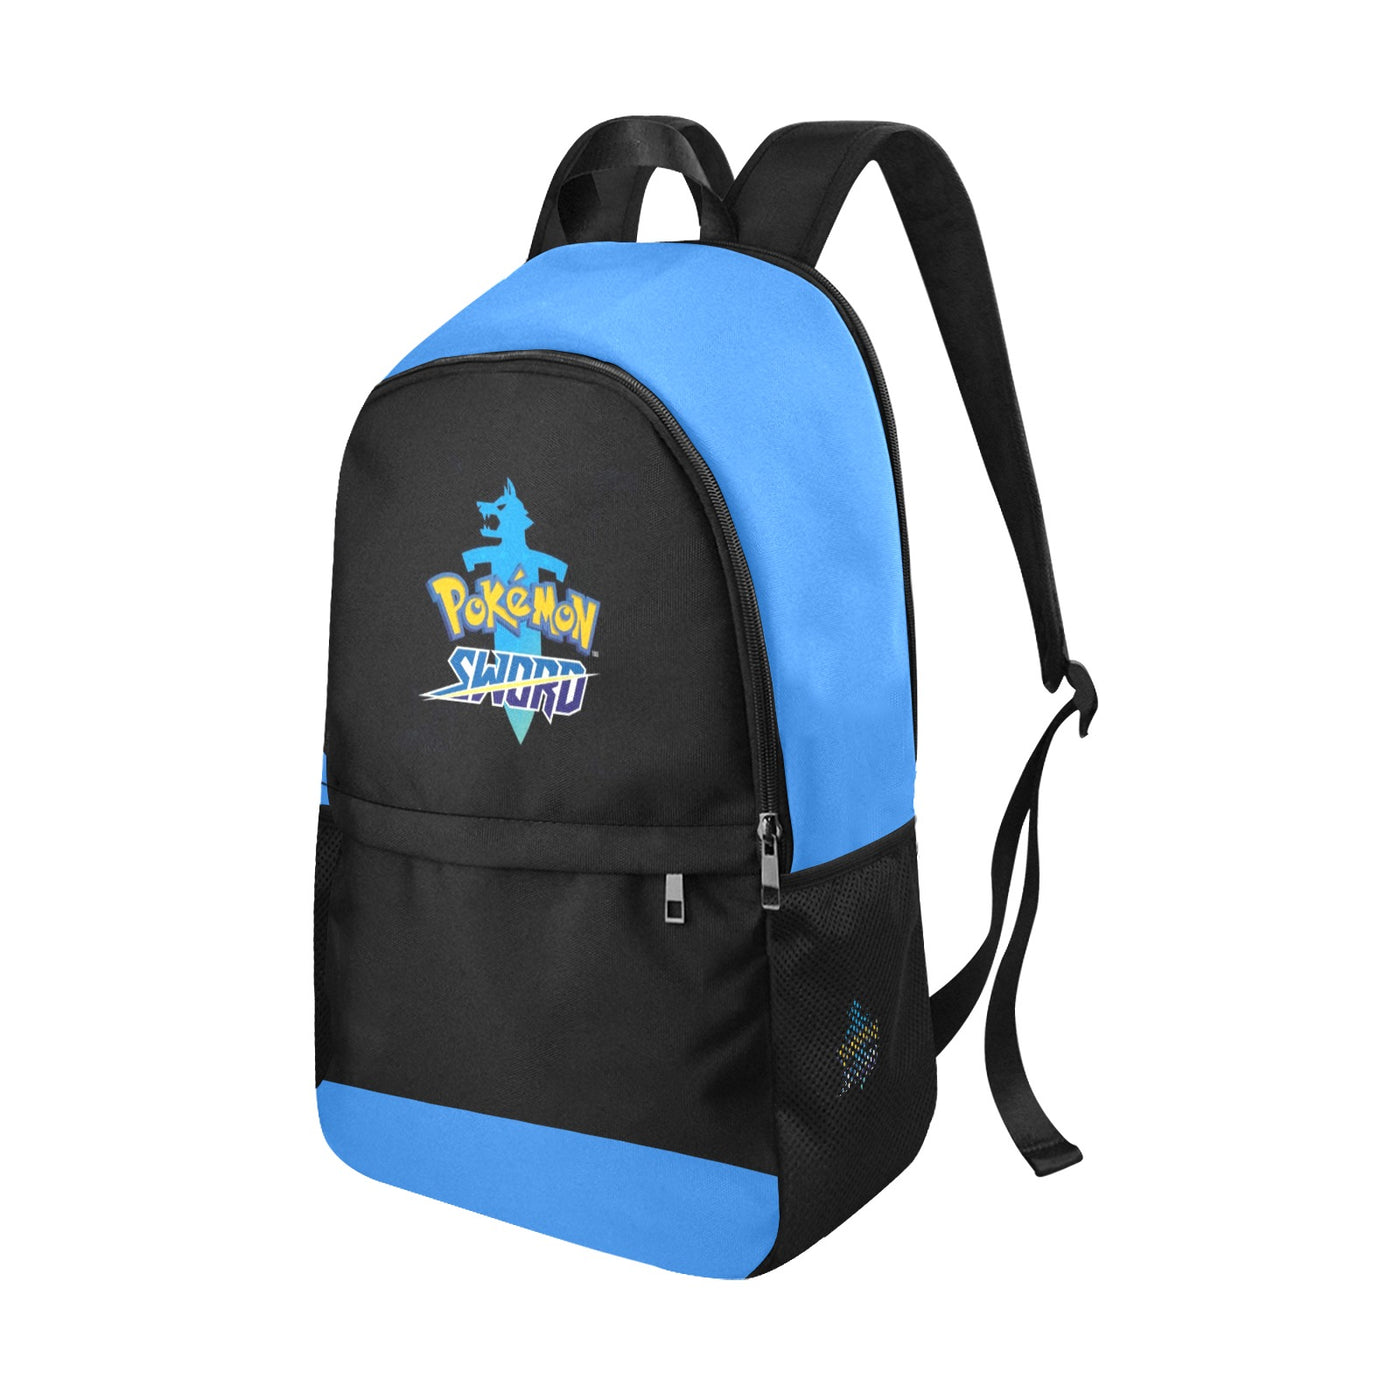 Pokémon Fabric Backpack with Side Mesh Pockets (1659)